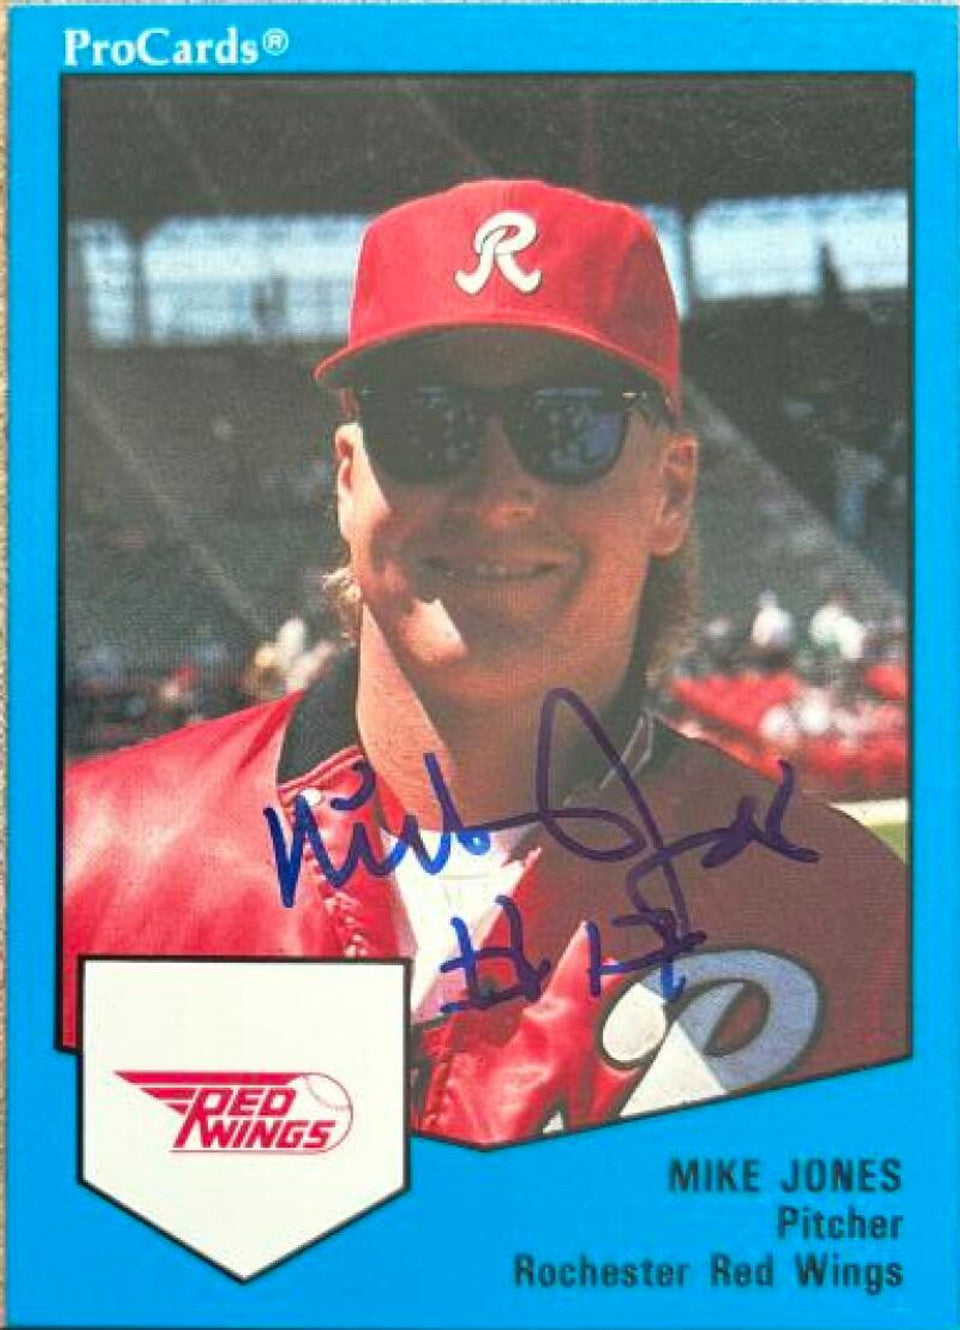 Mike Jones Signed 1989 ProCards Baseball Card - Rochester Red Wings